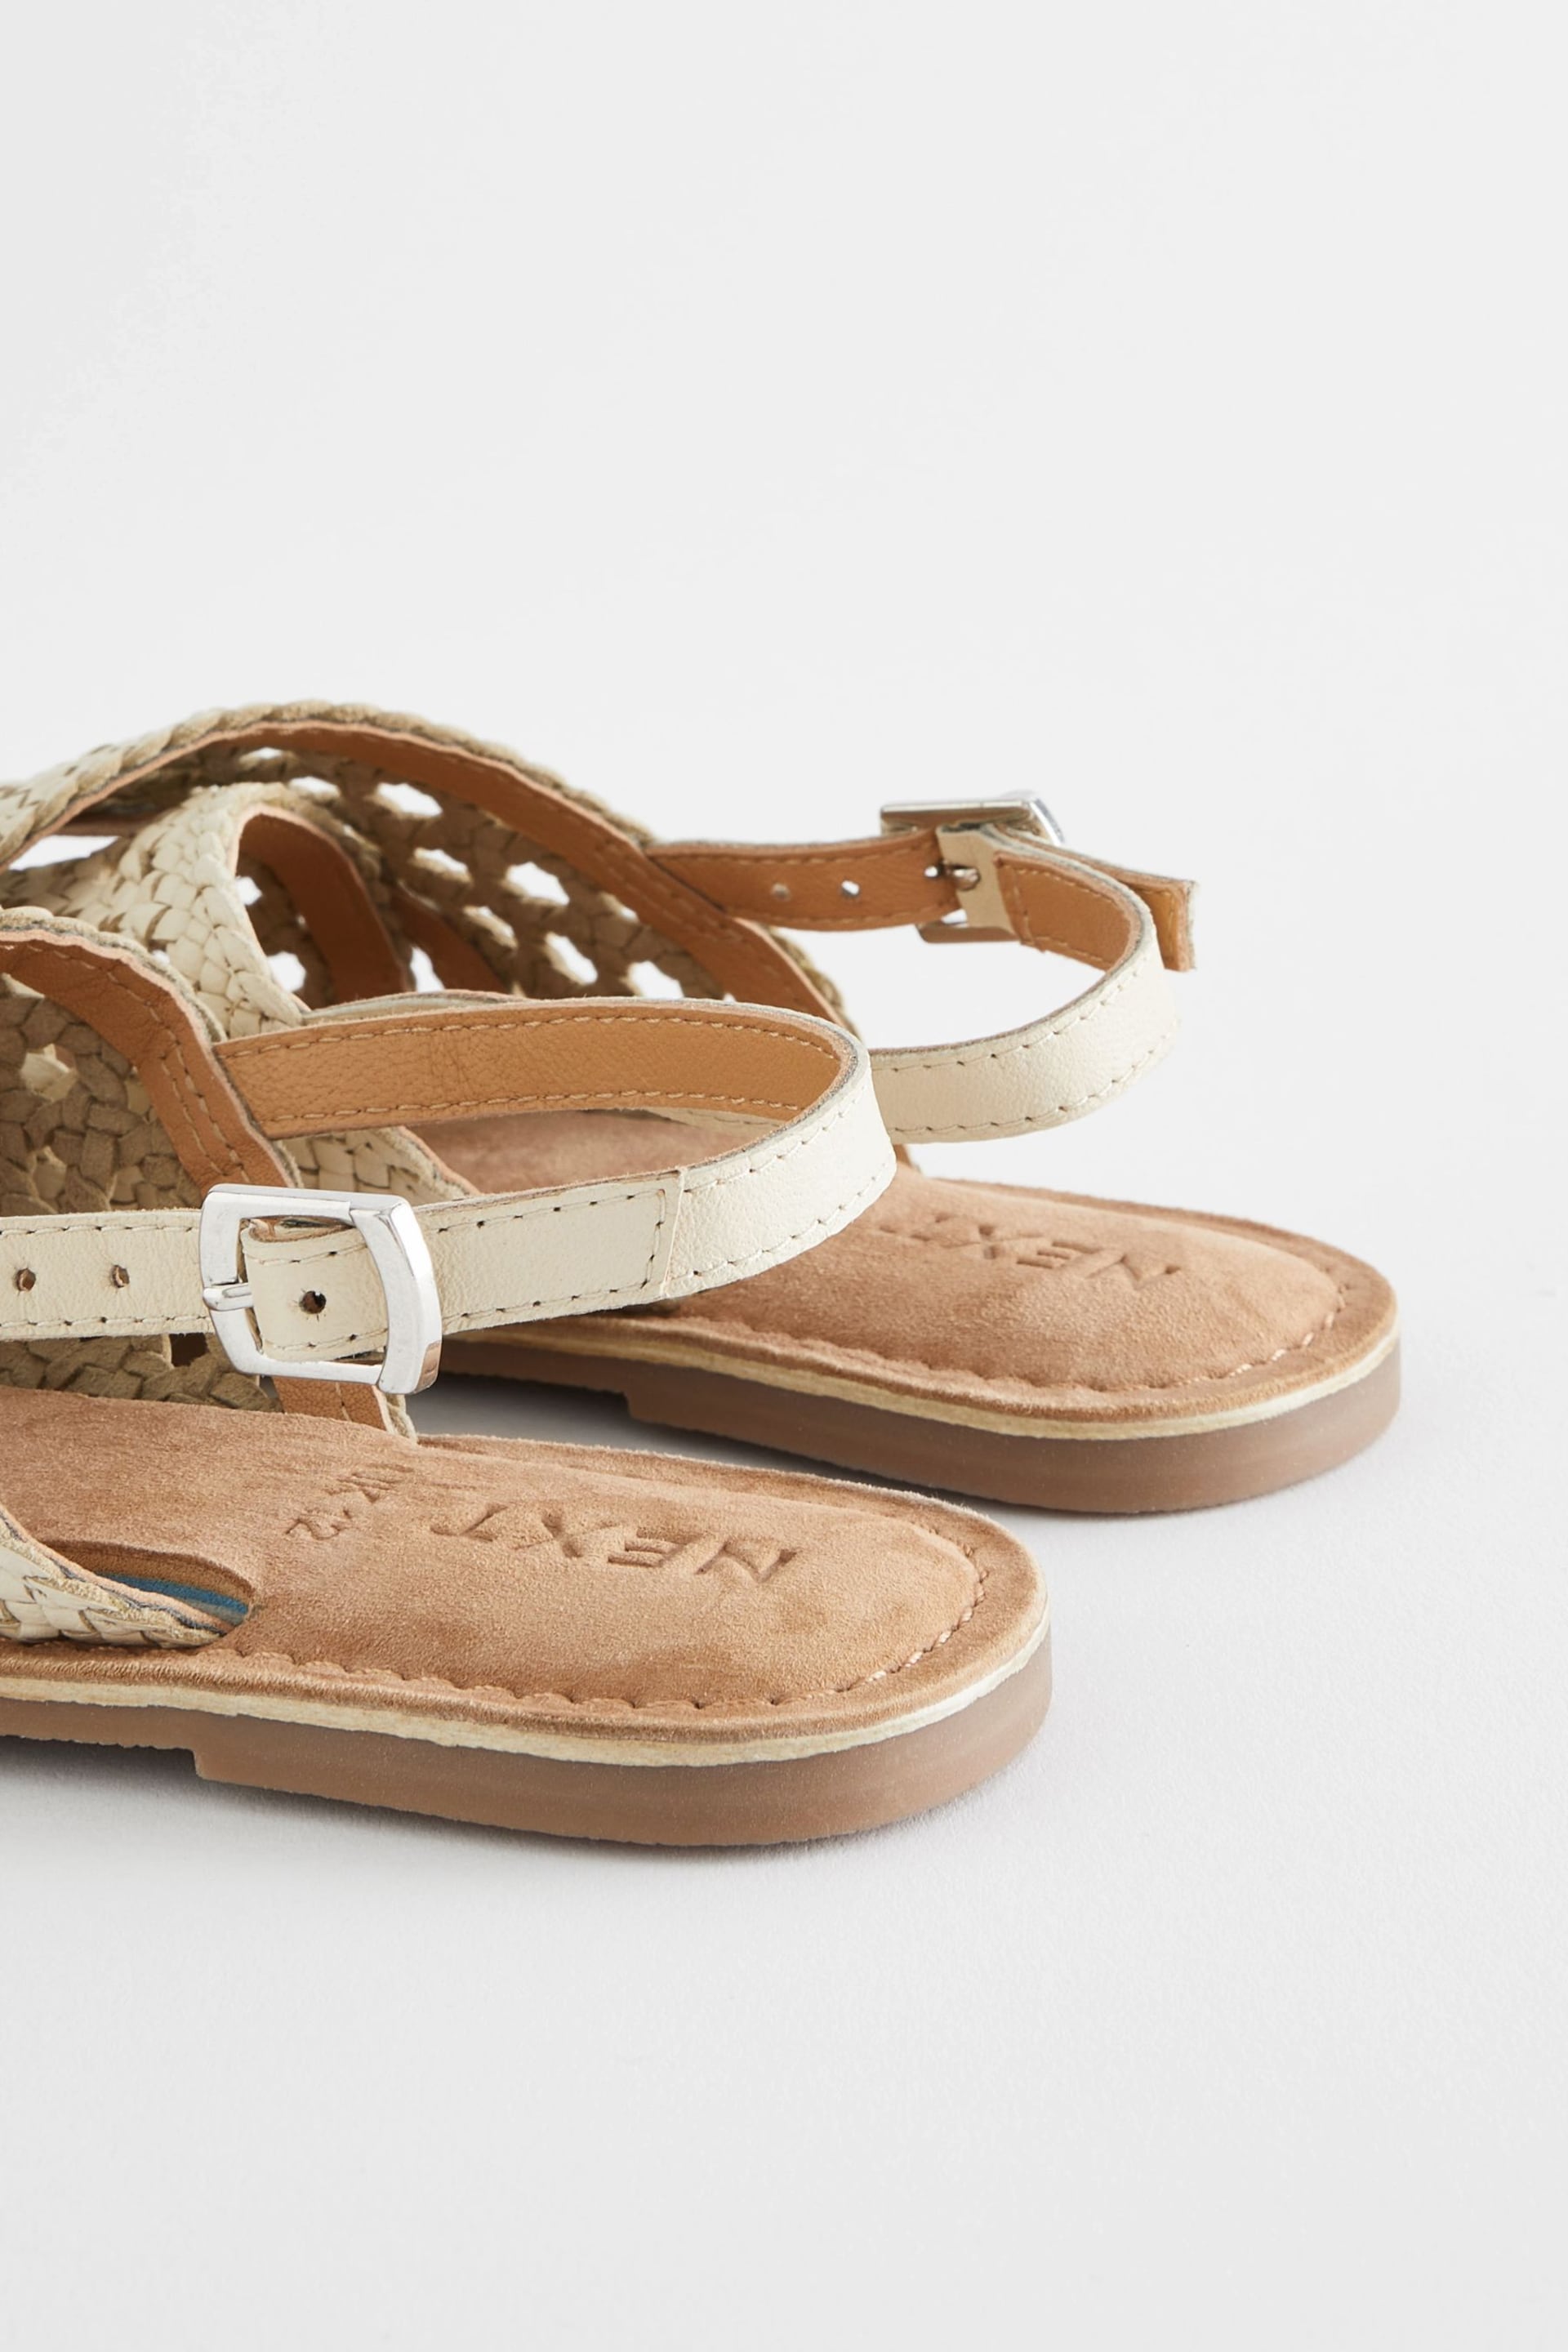 White Leather Cross Strap Sandals - Image 7 of 7